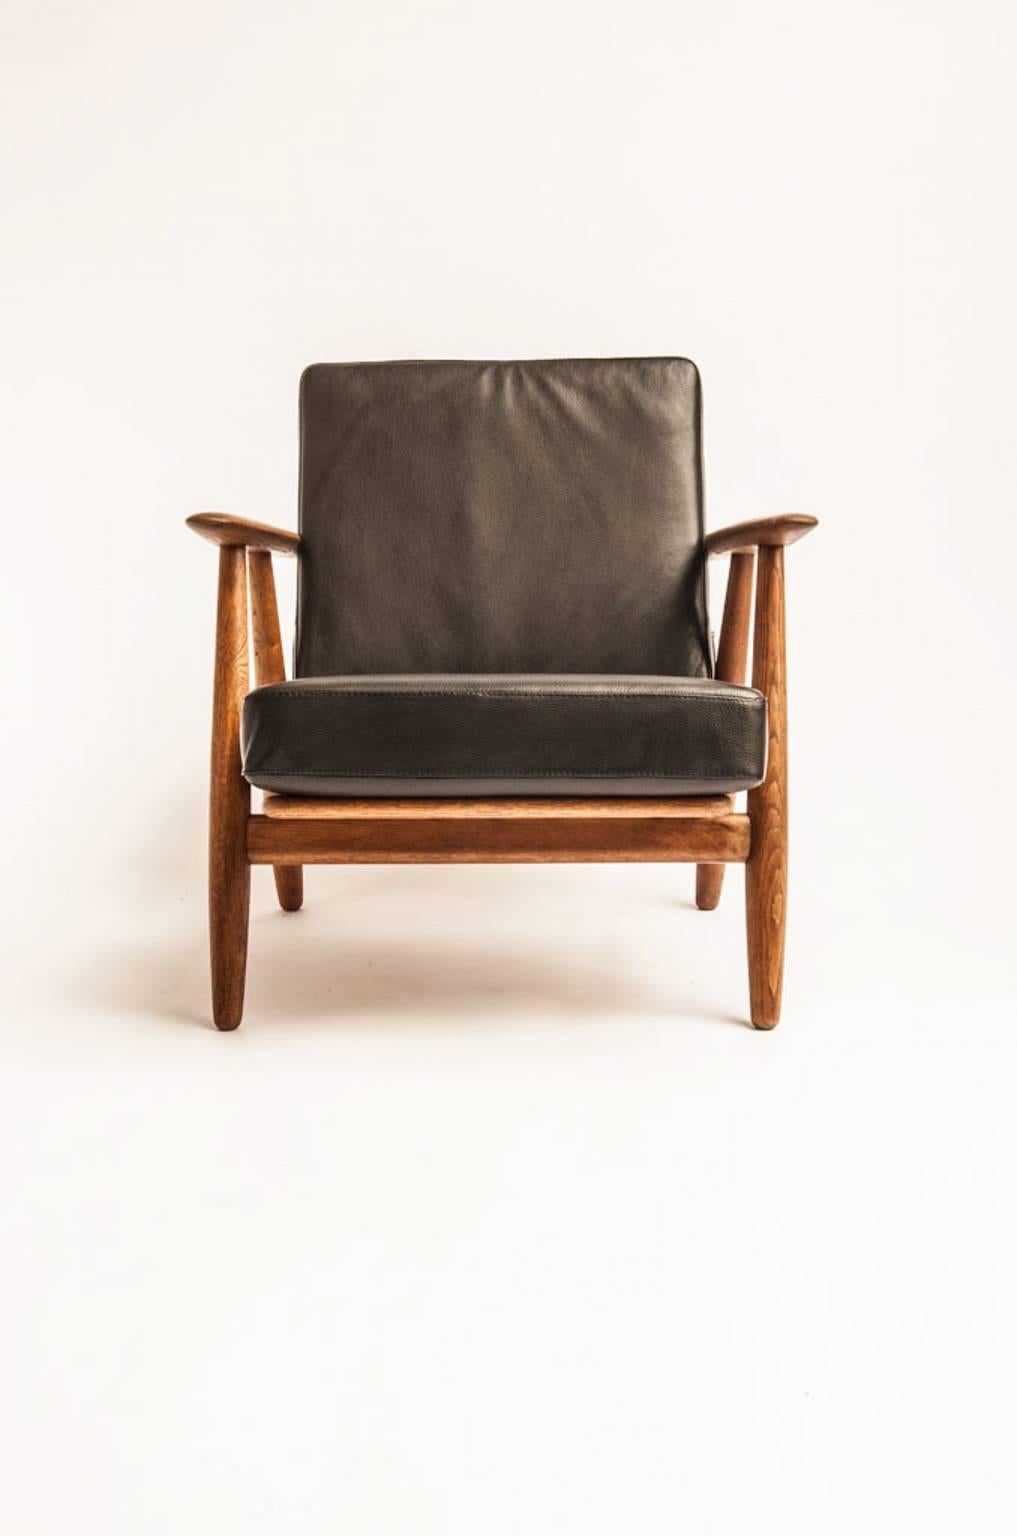 Fantastic GE290/4 – The Cigar - lounge chair designed in the 1950s by Hans J. Wegner for GETAMA, Denmark. Solid oak frames with sprung cushions newly reupholstered by a professional upholsterer in black leather.